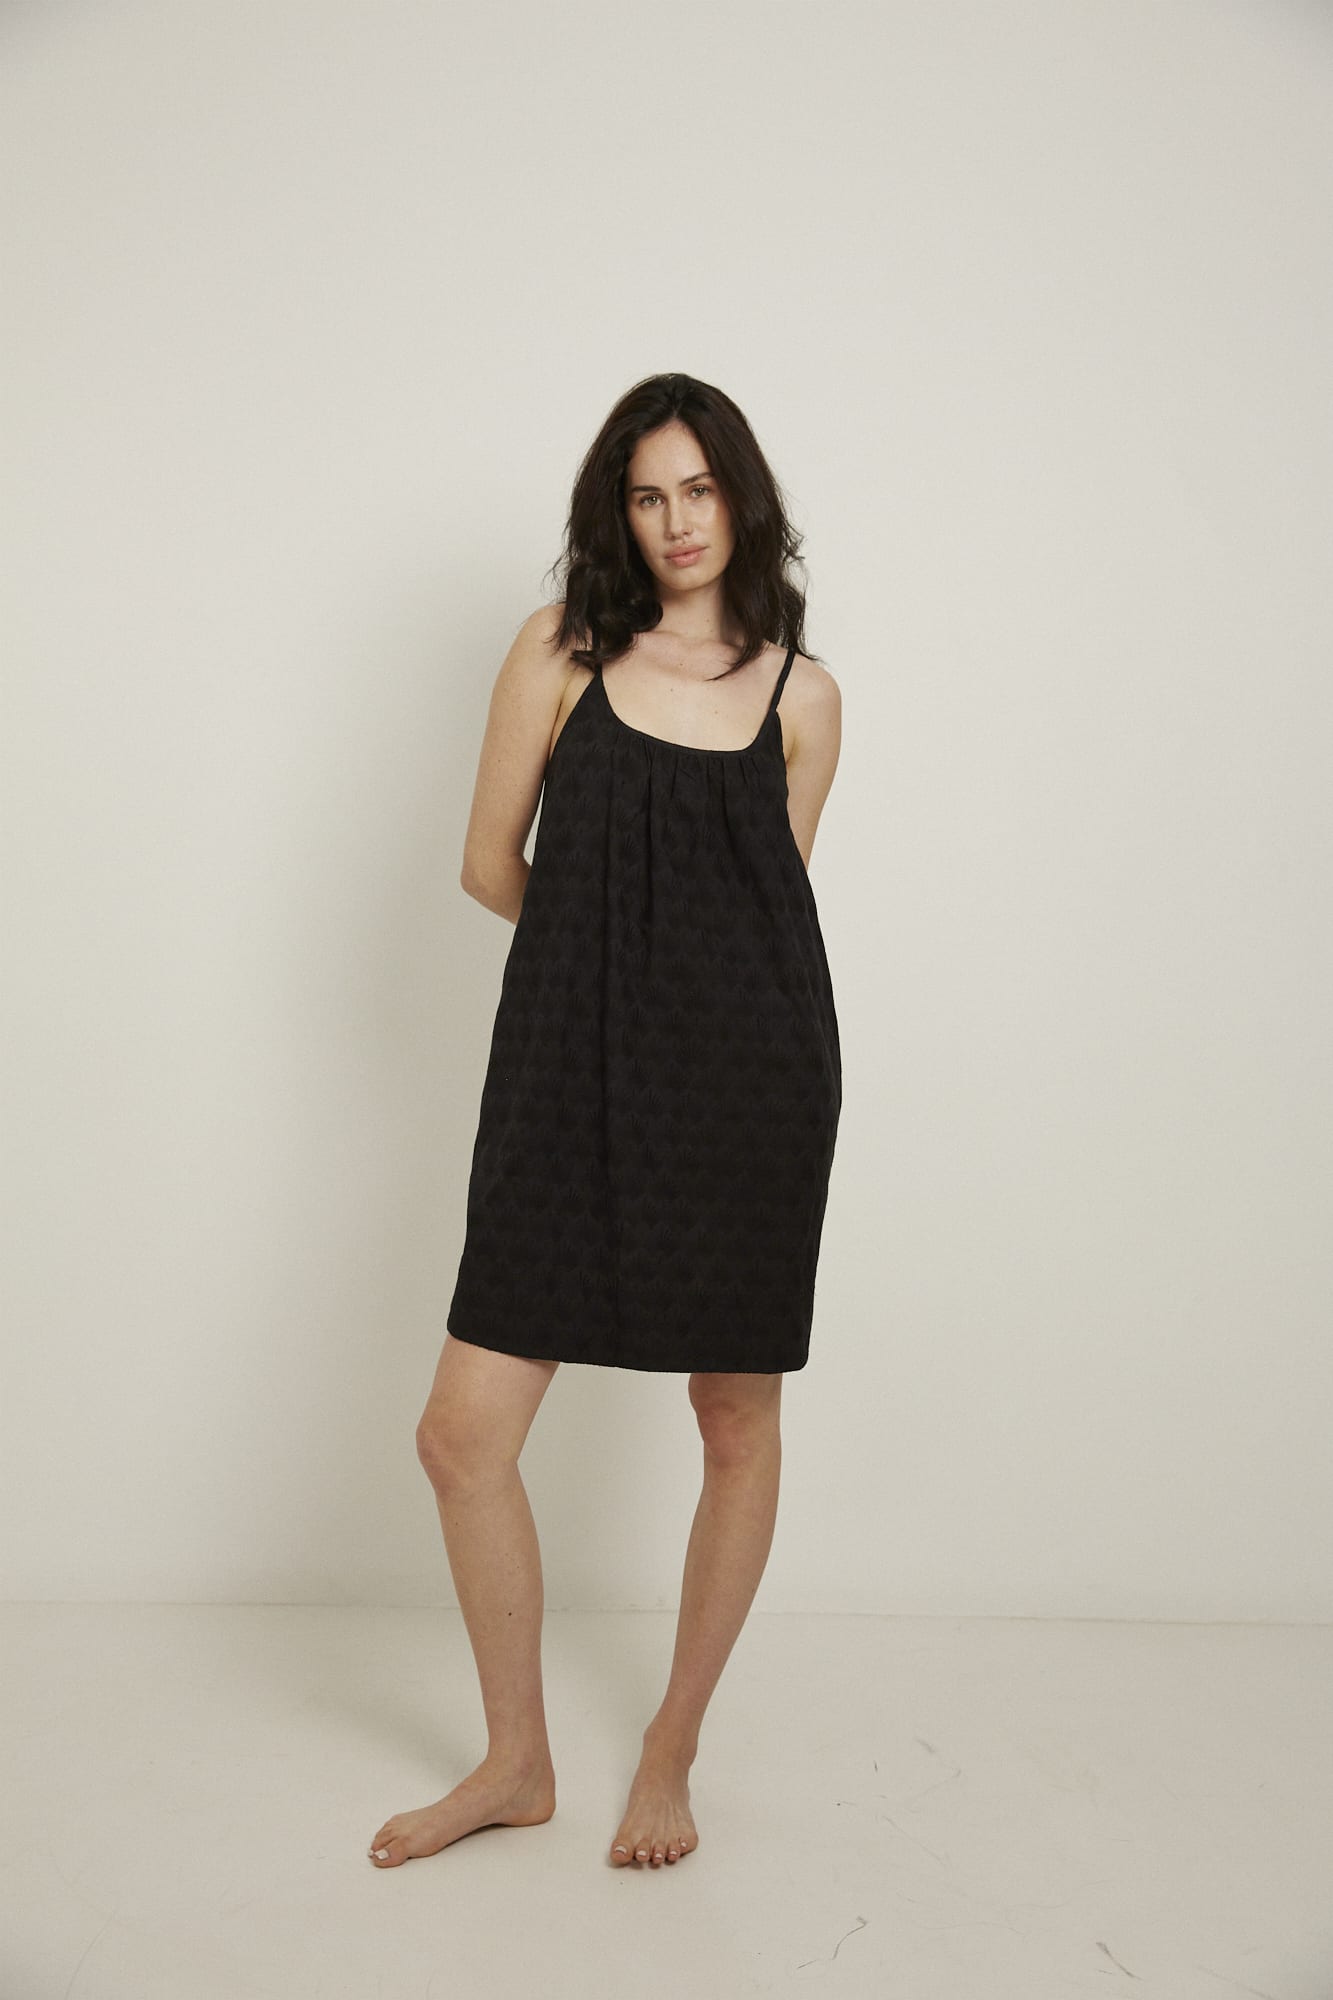 This knee length women’s nightdress dress features a scoop neck, adjustable spaghetti straps and side pockets. Finished with a wide hem, French seams, it is made from 100% organic cotton, in black, and features delicate all over embroidery.